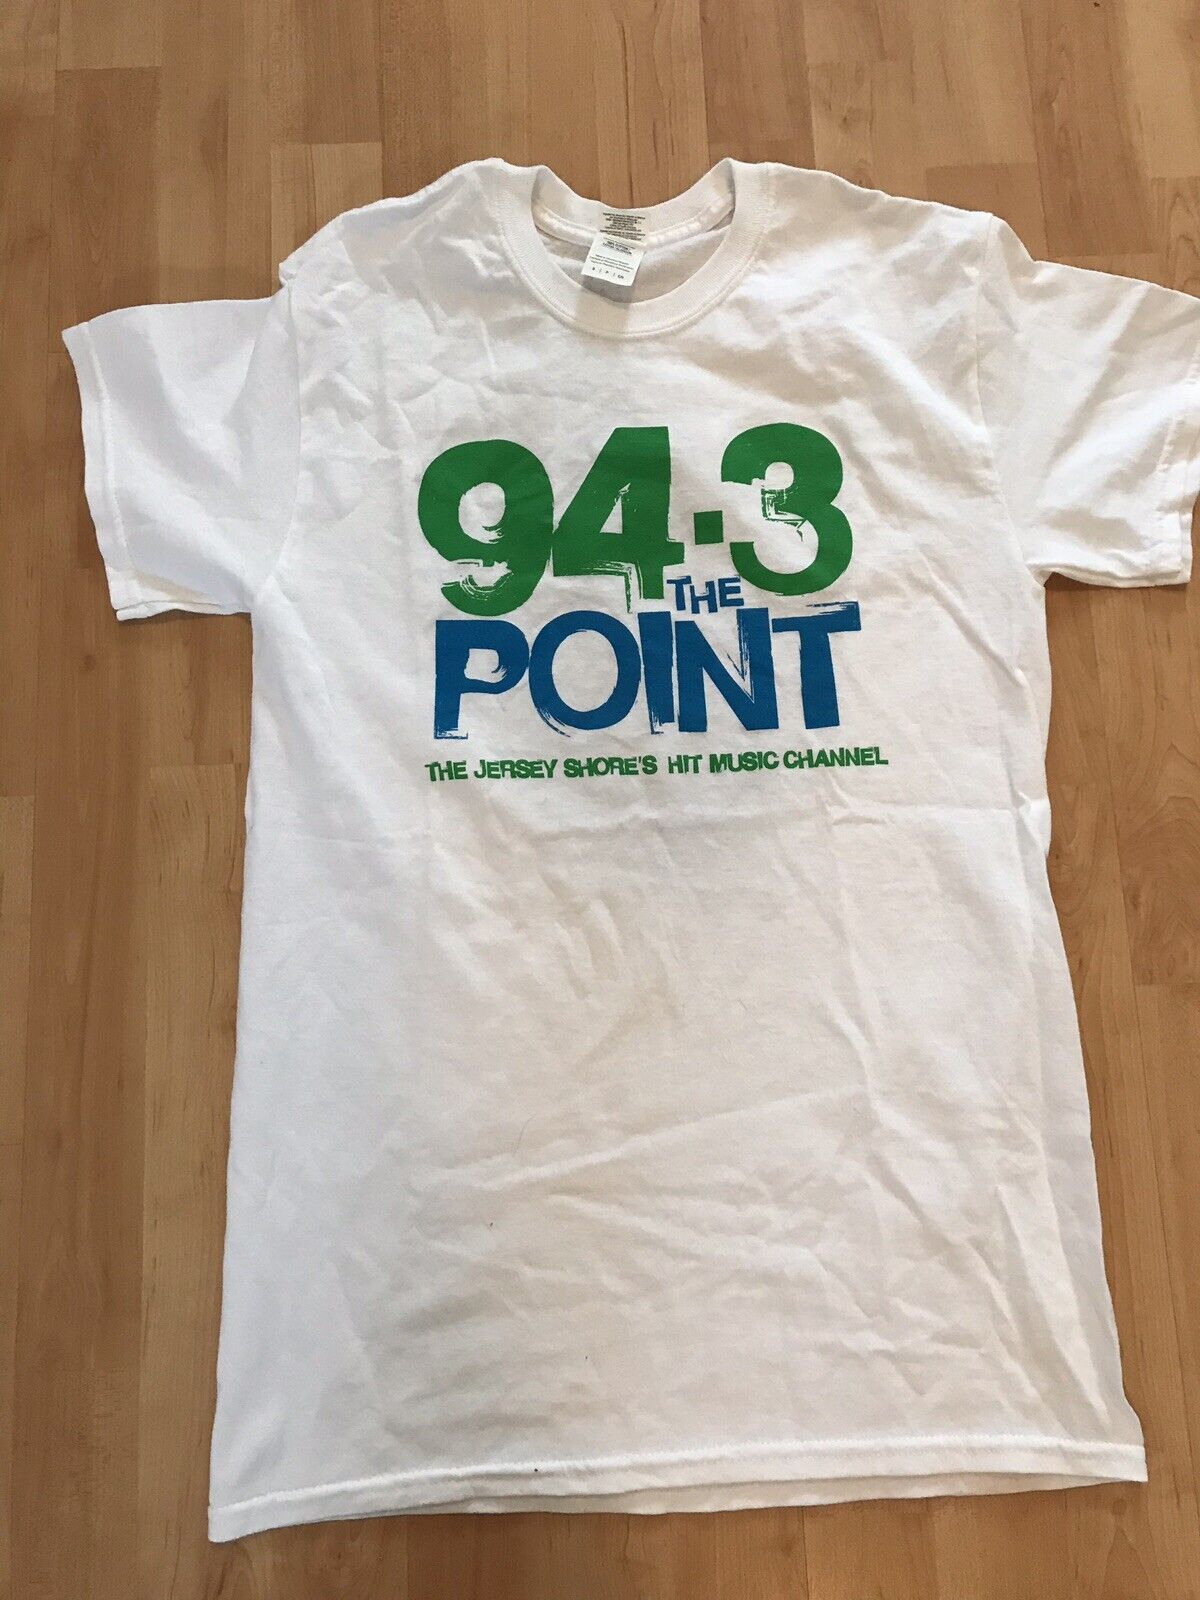 94.3 The Point Radio Tshirt Size Small